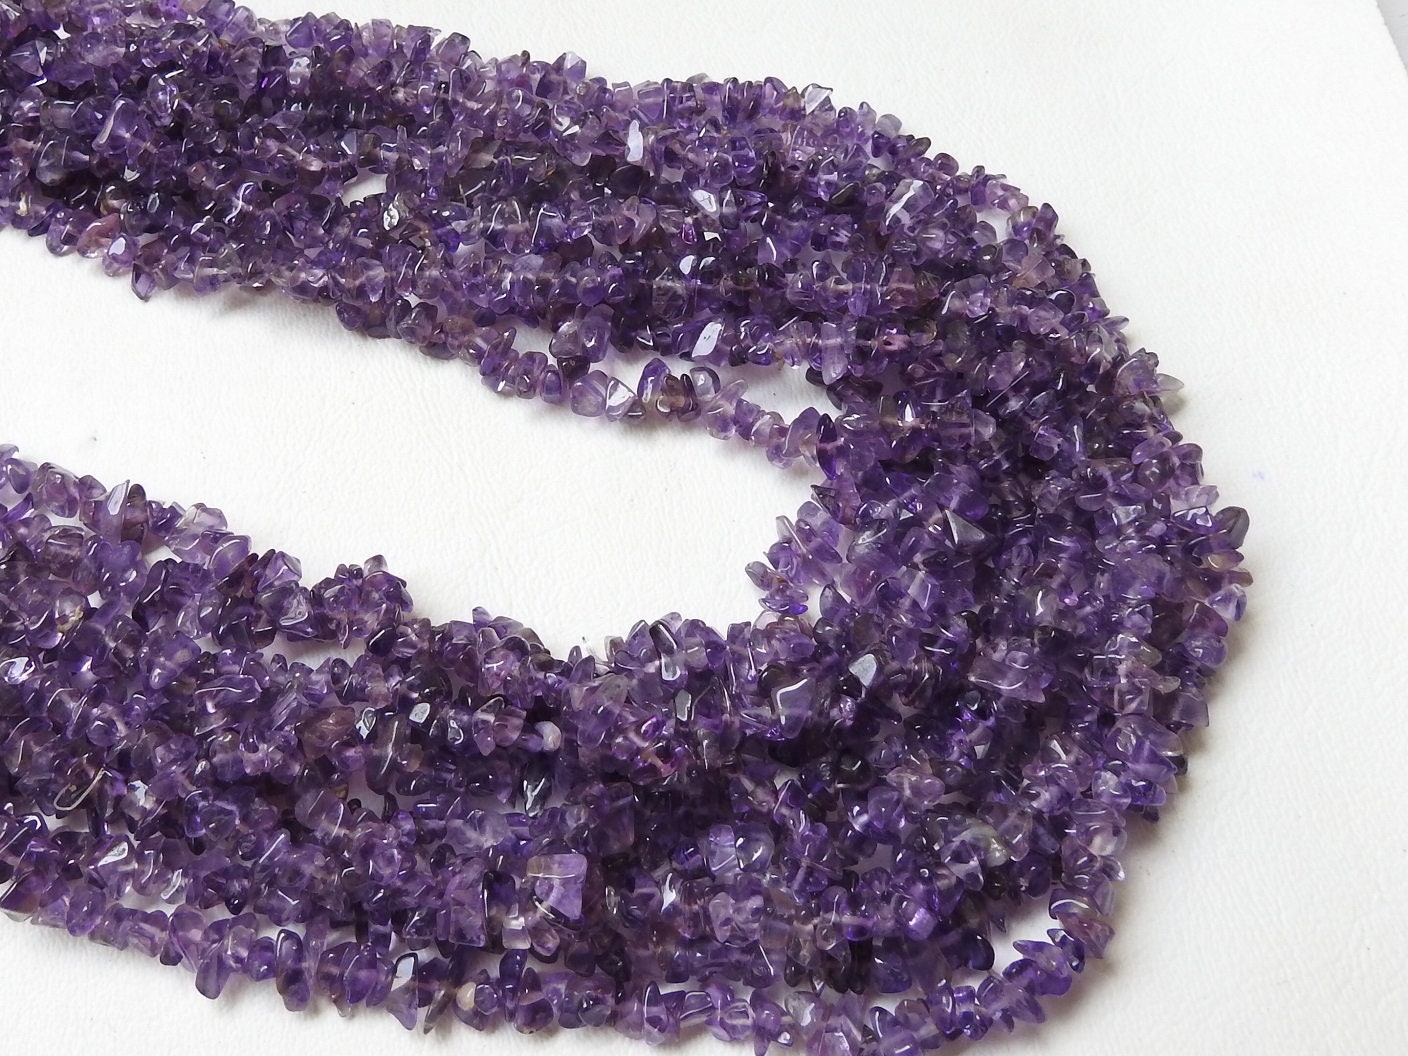 Amethyst Polished Rough Bead,Chip,Uncut,Anklets,Loose Stone,32Inch Strand 8X4To5X4MM Approx,Wholesaler,Supplies,100%Natural PME-R3 | Save 33% - Rajasthan Living 14